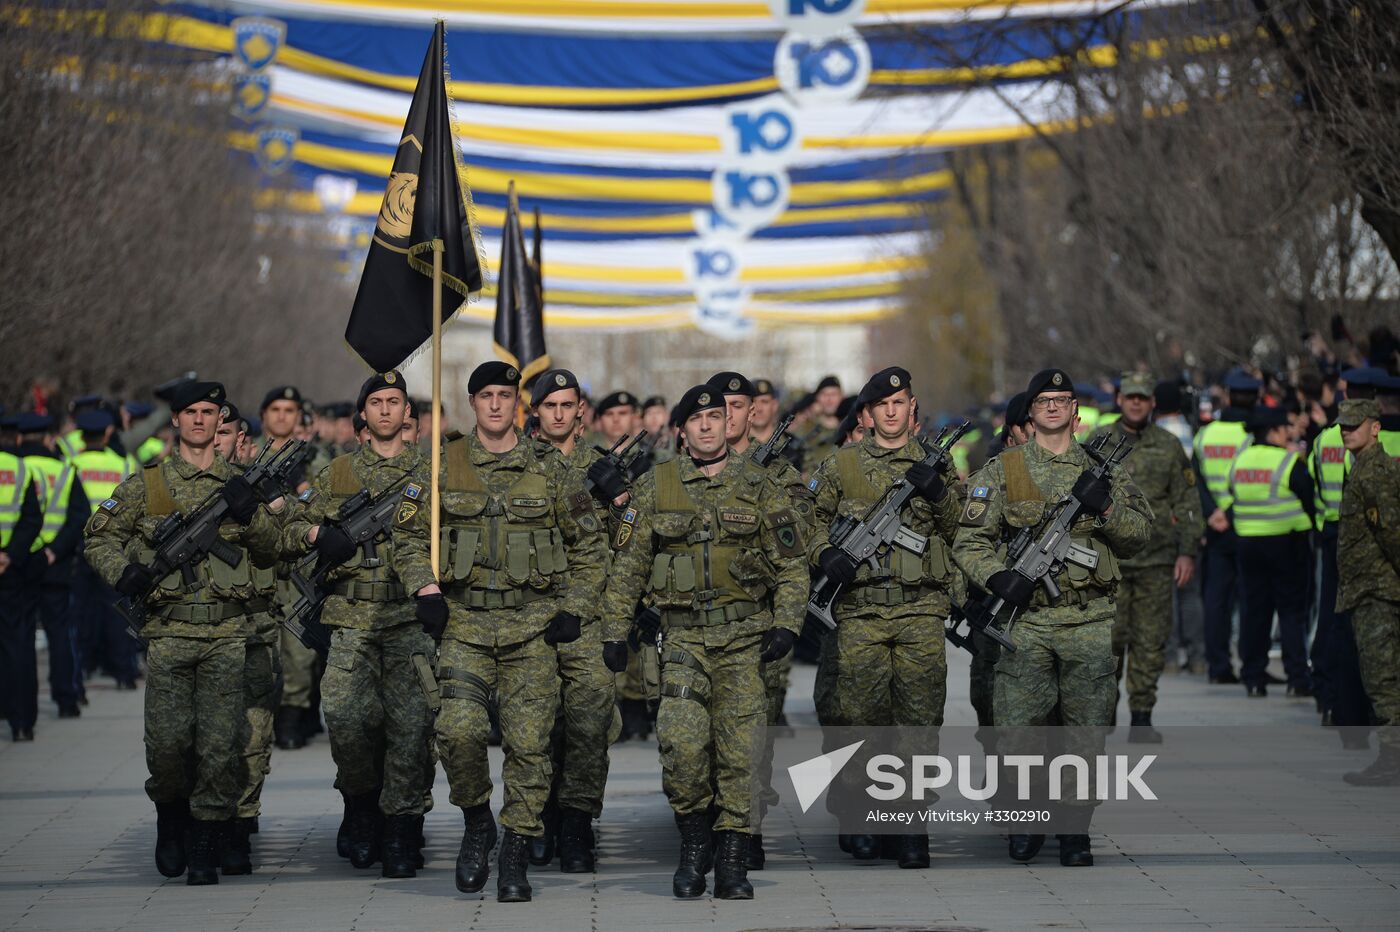 Celebrations of 10th anniversary of Kosovo independence